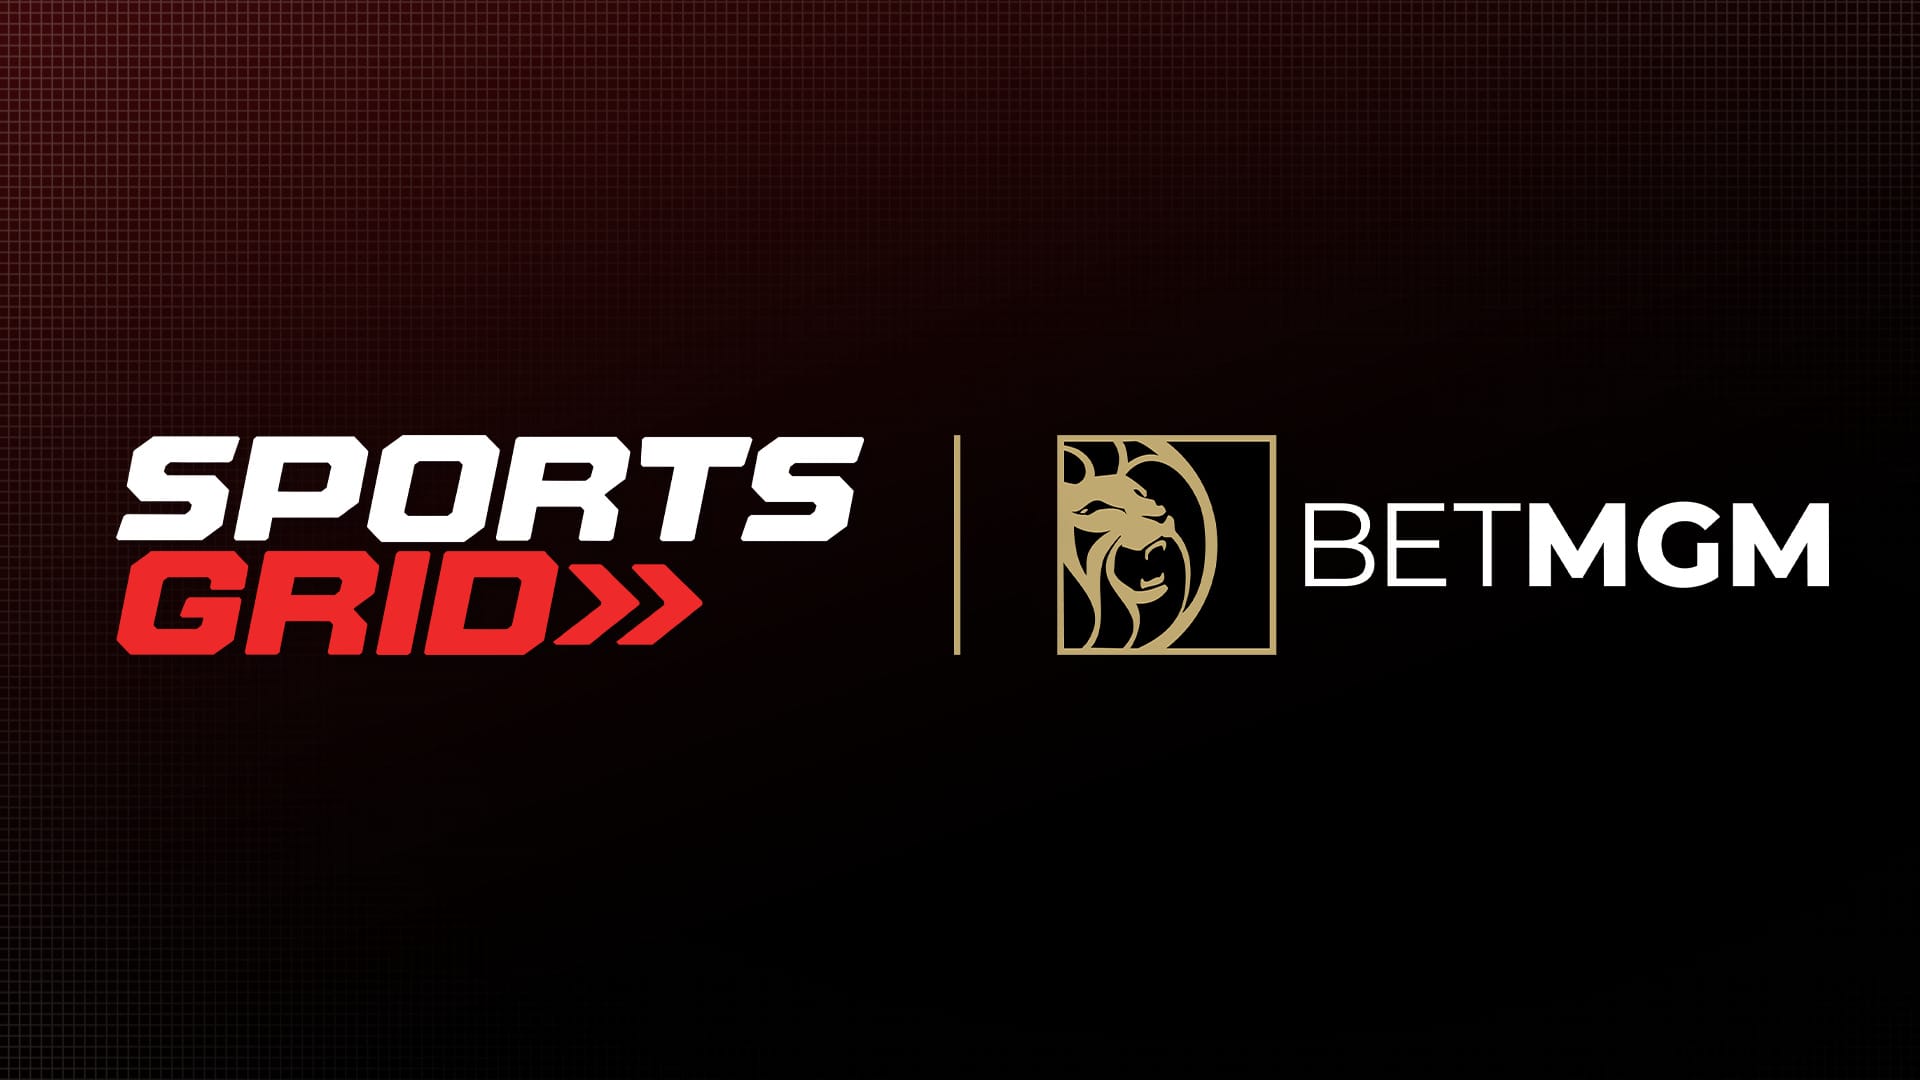 SportsGrid logo next to the BetMGM logo on a red and black background.